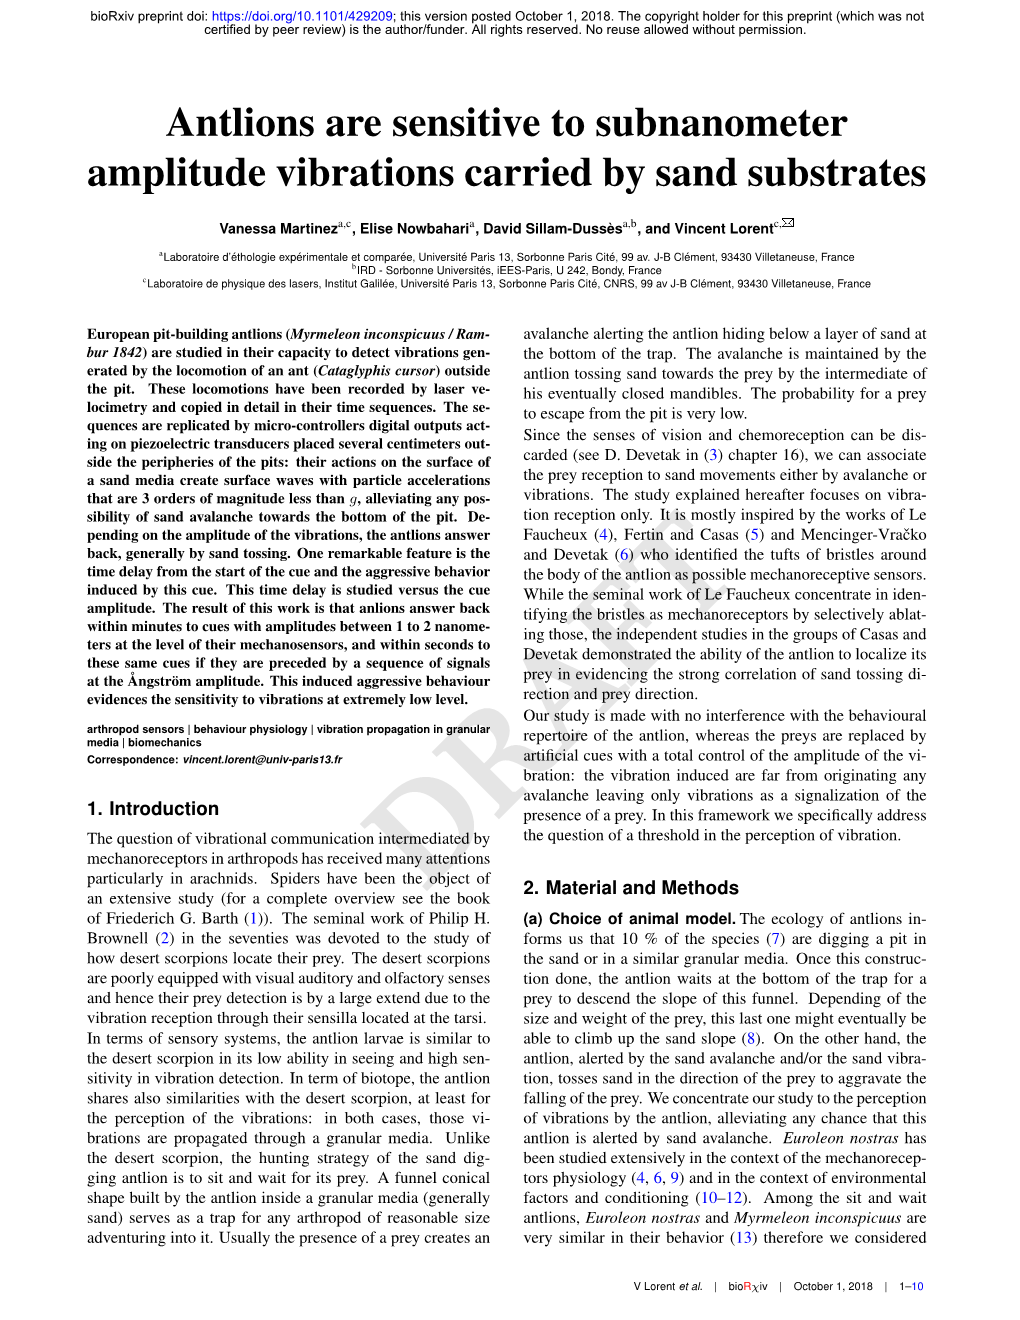 Antlions Are Sensitive to Subnanometer Amplitude Vibrations Carried by Sand Substrates